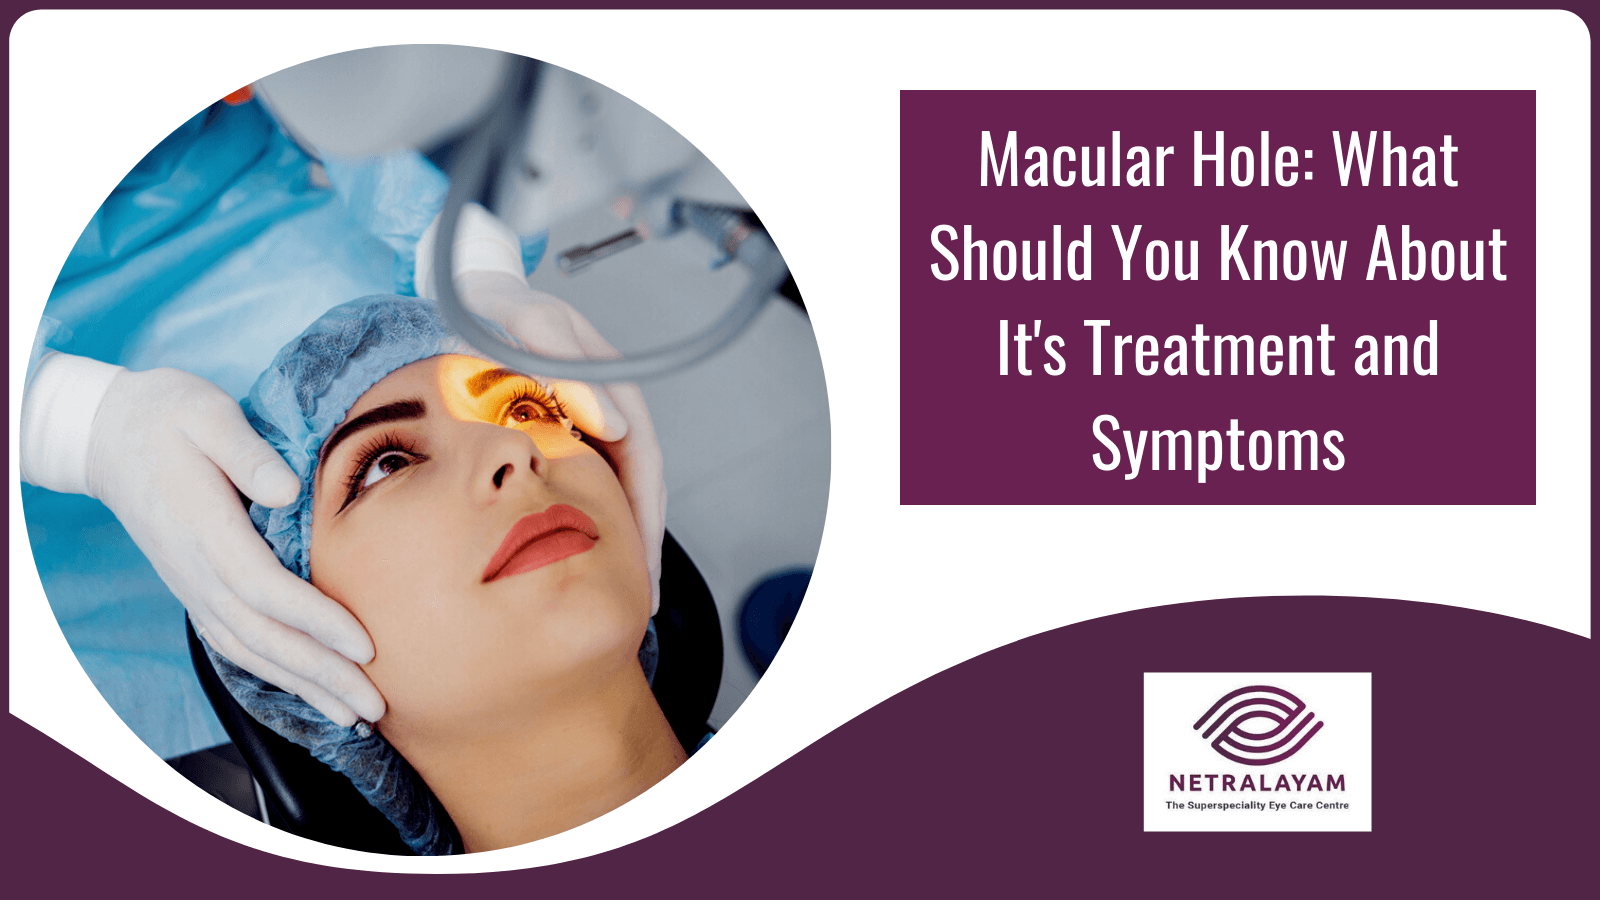 Macular Hole: What Should You Know About It's Treatment and Symptoms